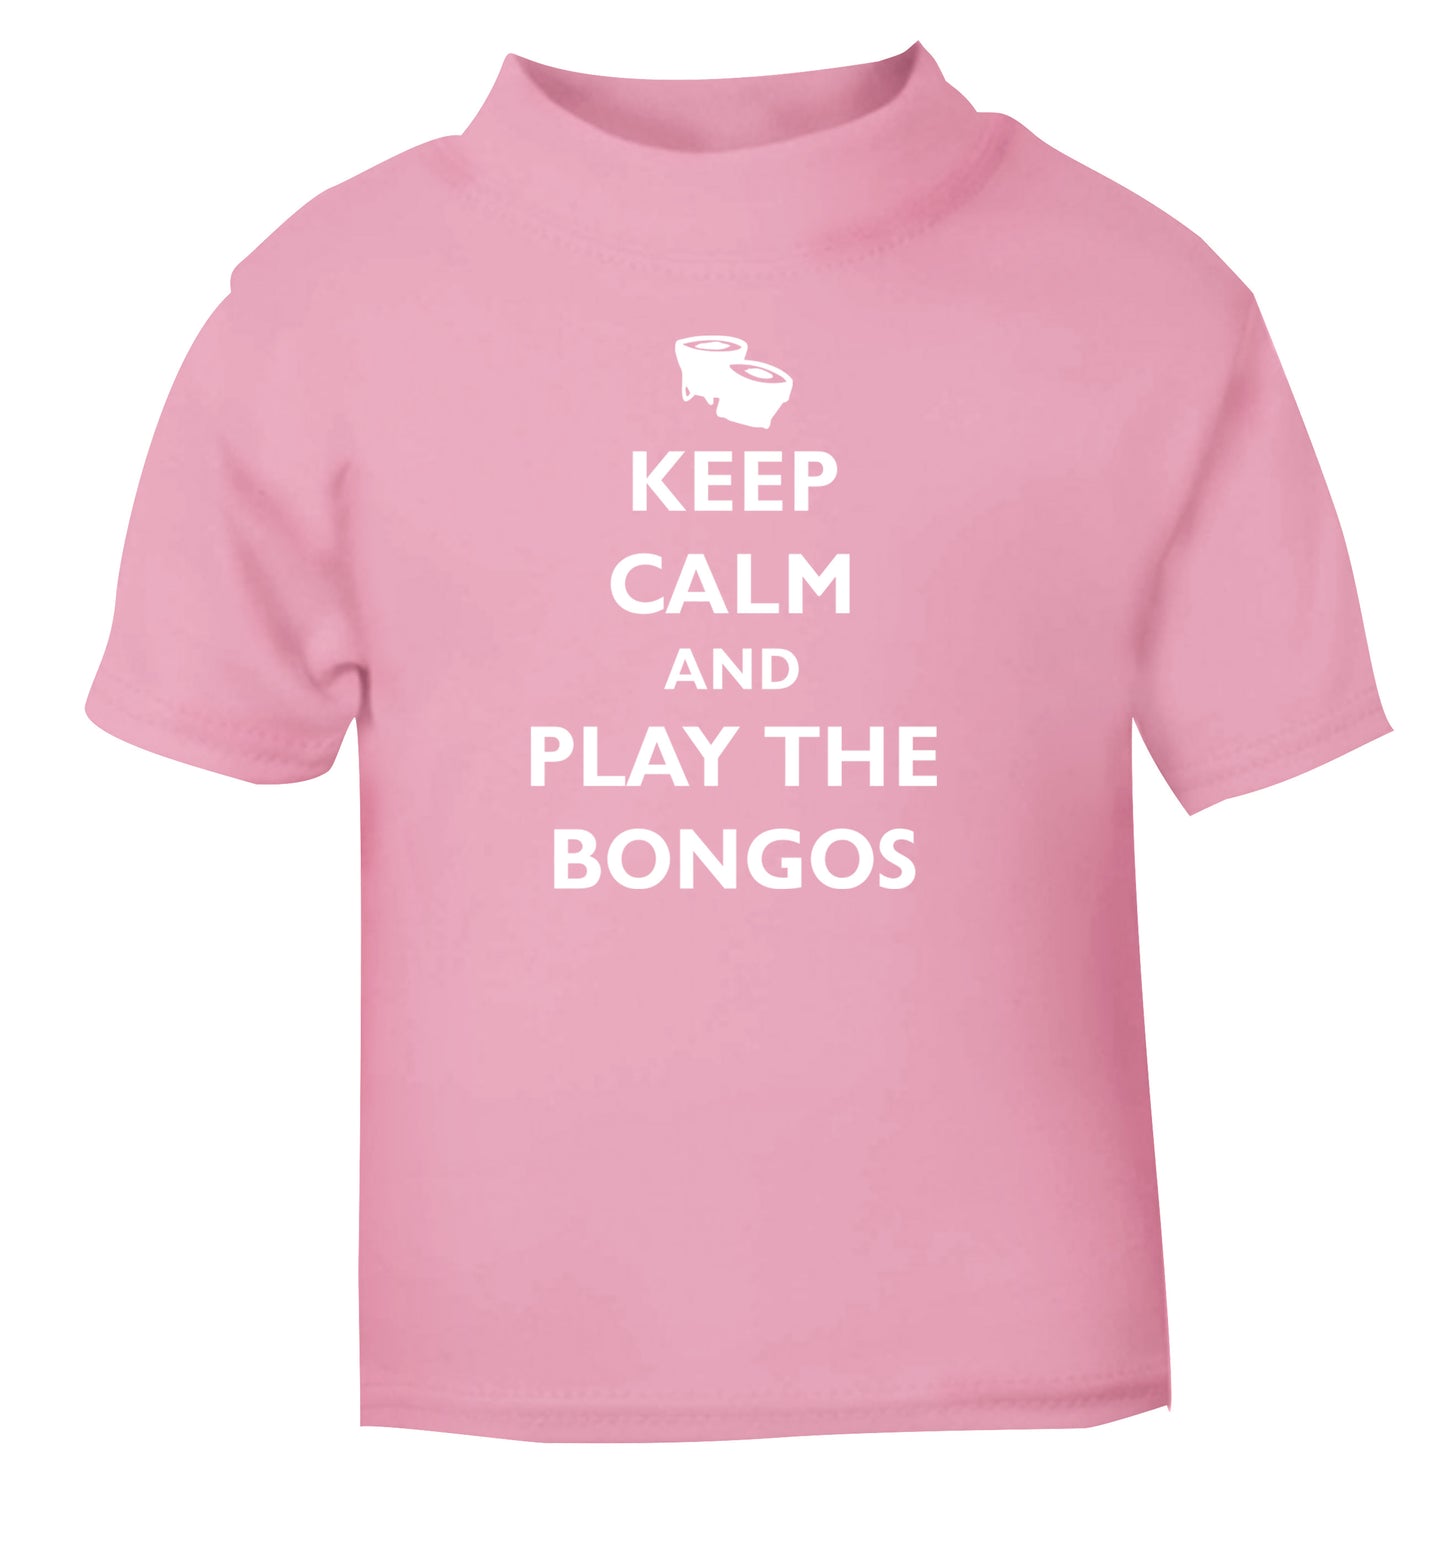 Keep calm and play the bongos light pink Baby Toddler Tshirt 2 Years